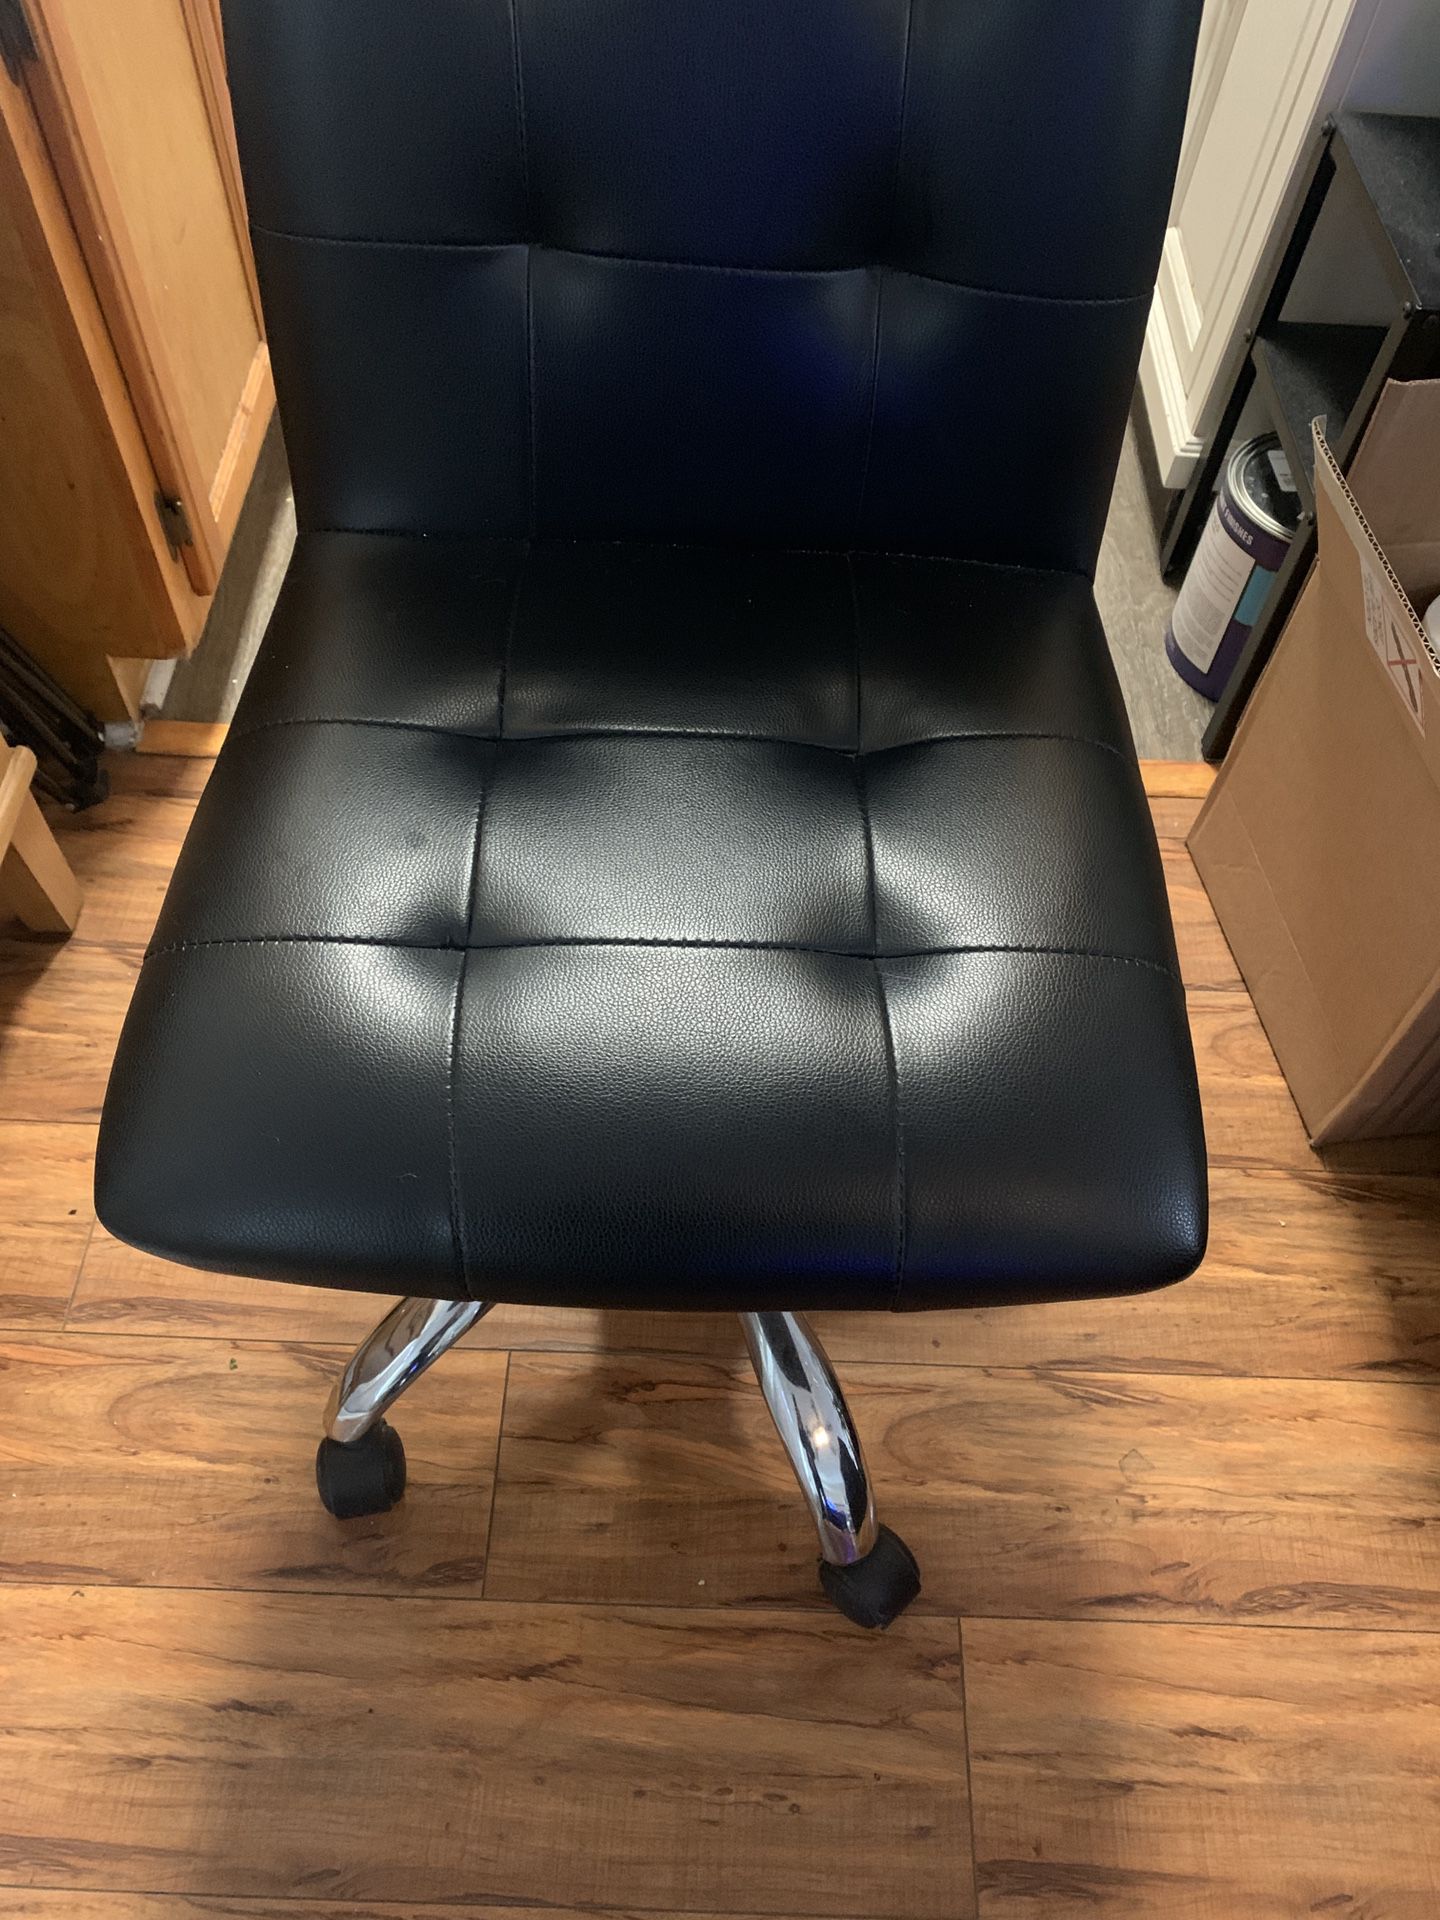 Nice Black Leather Office Chair